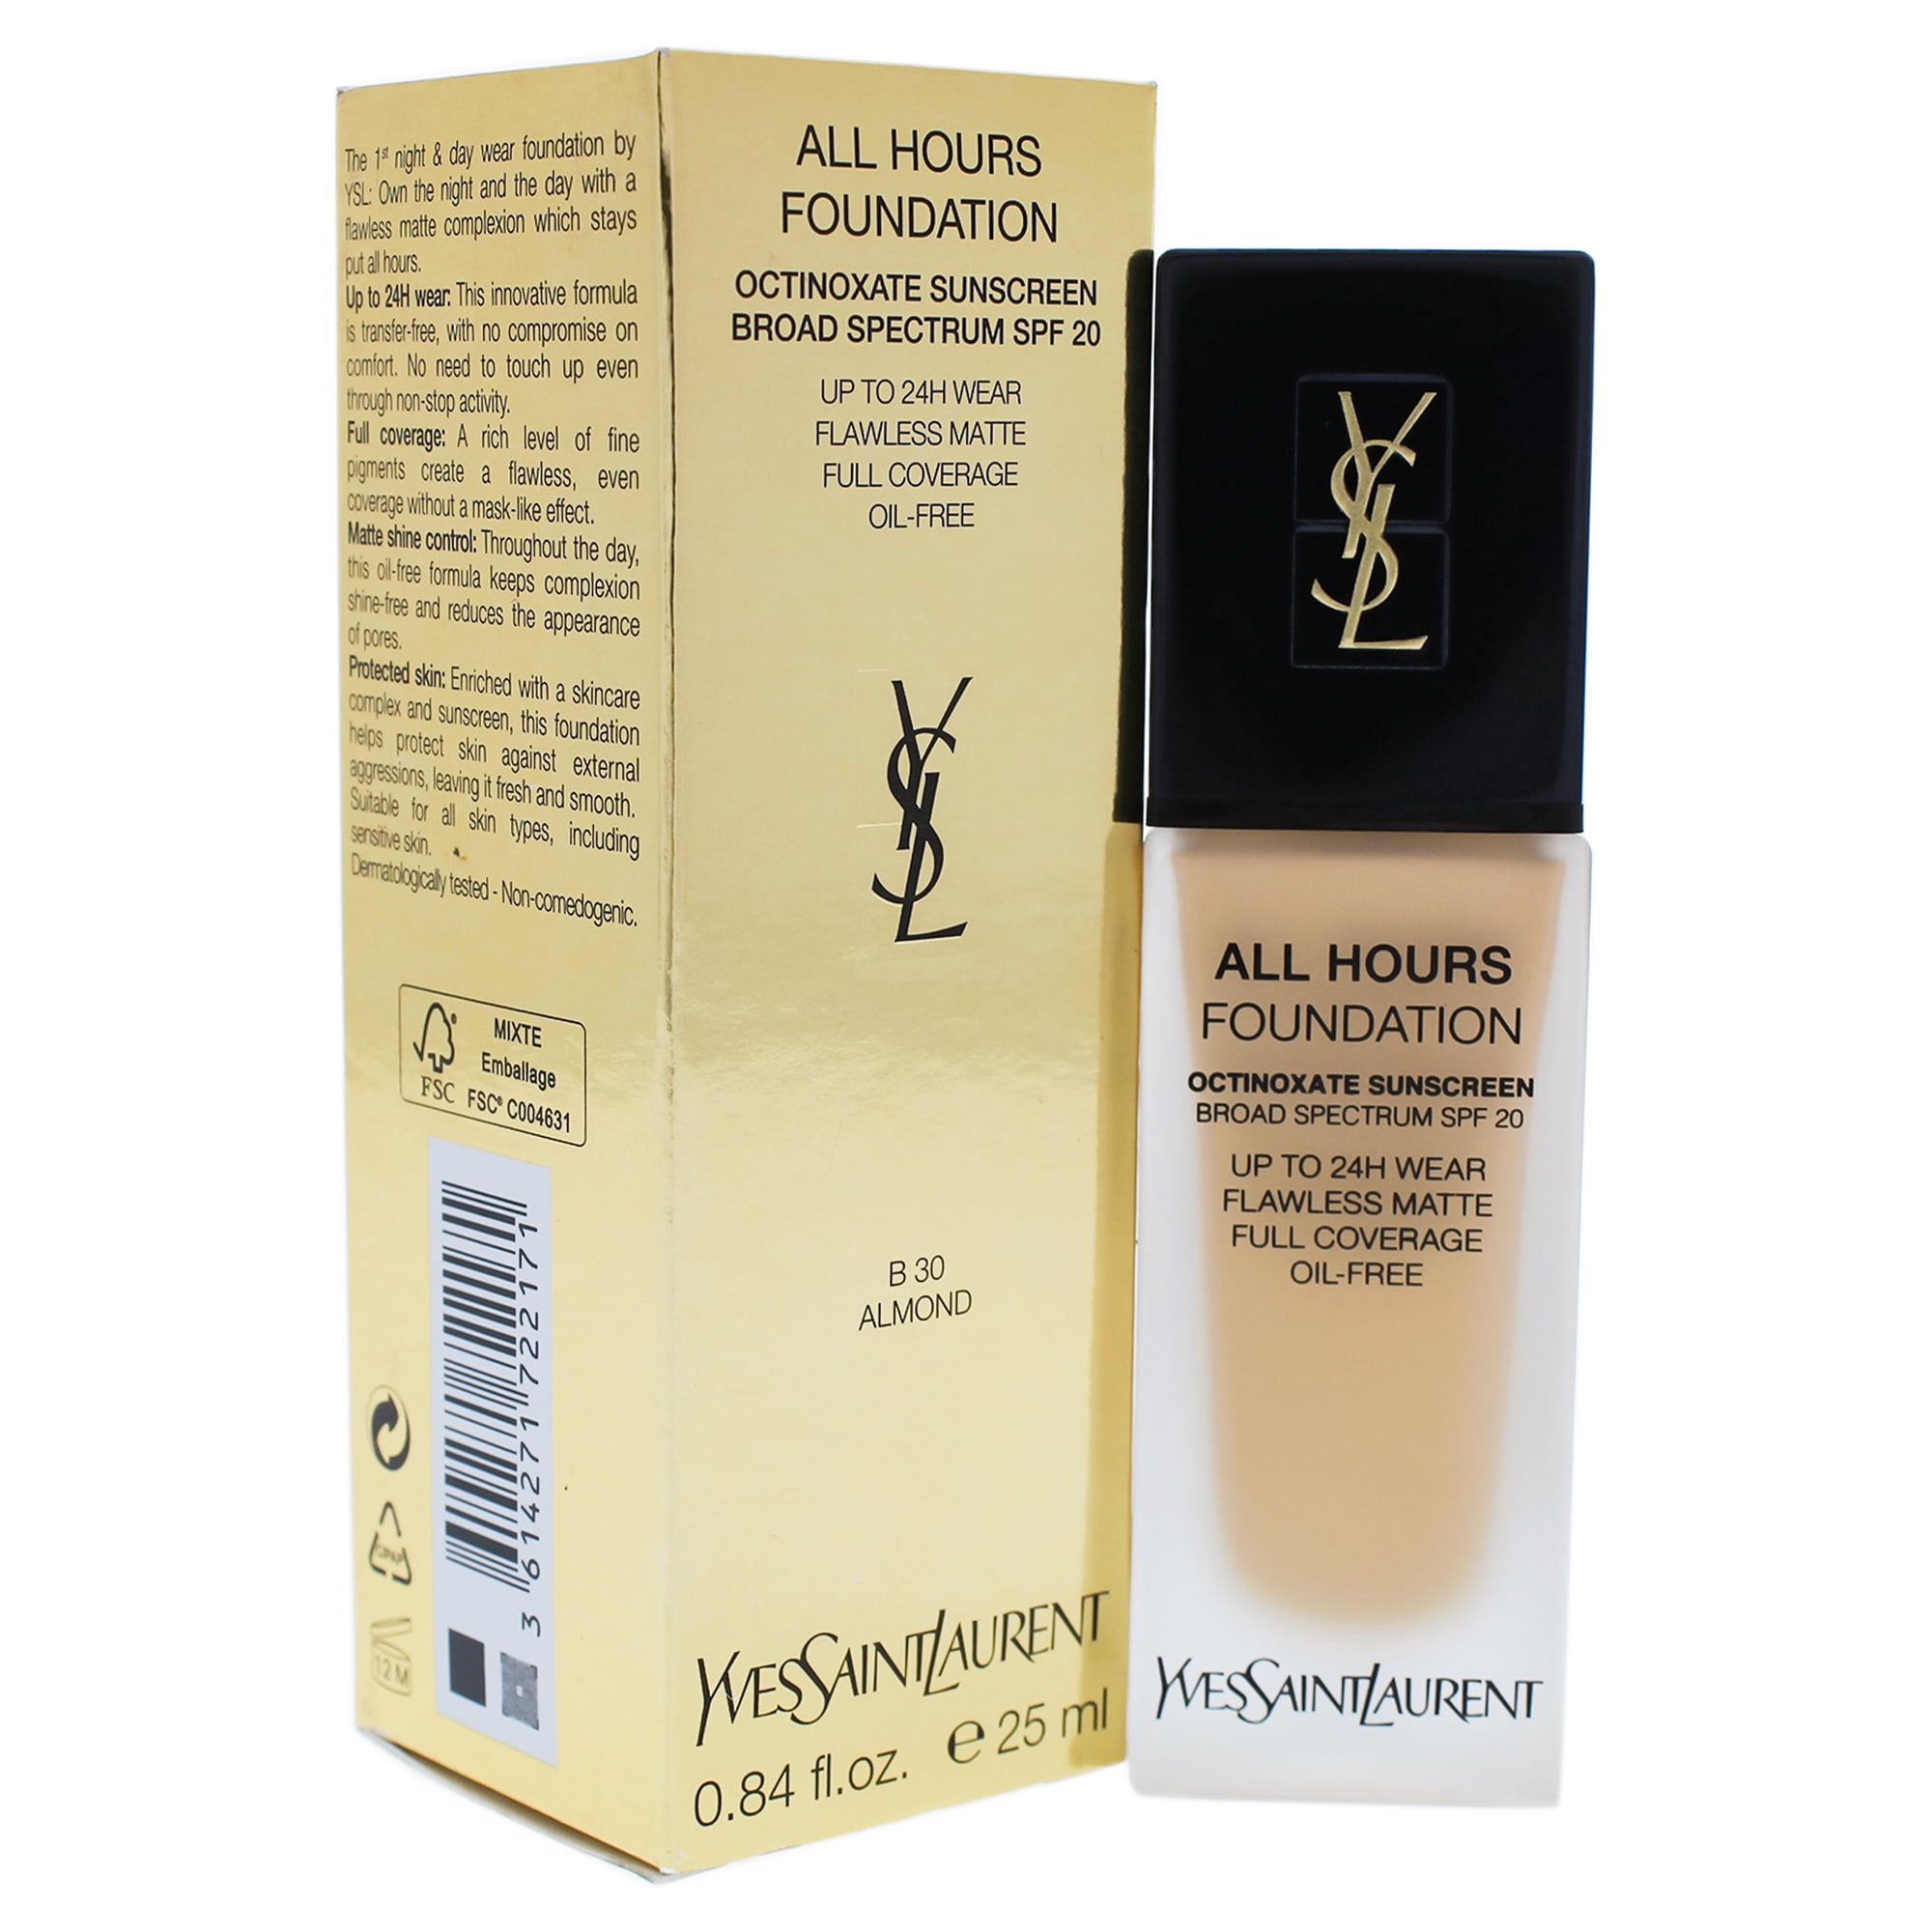 Yves Saint Laurent - All Hours Foundation SPF 20 - B30 Almond by Yves